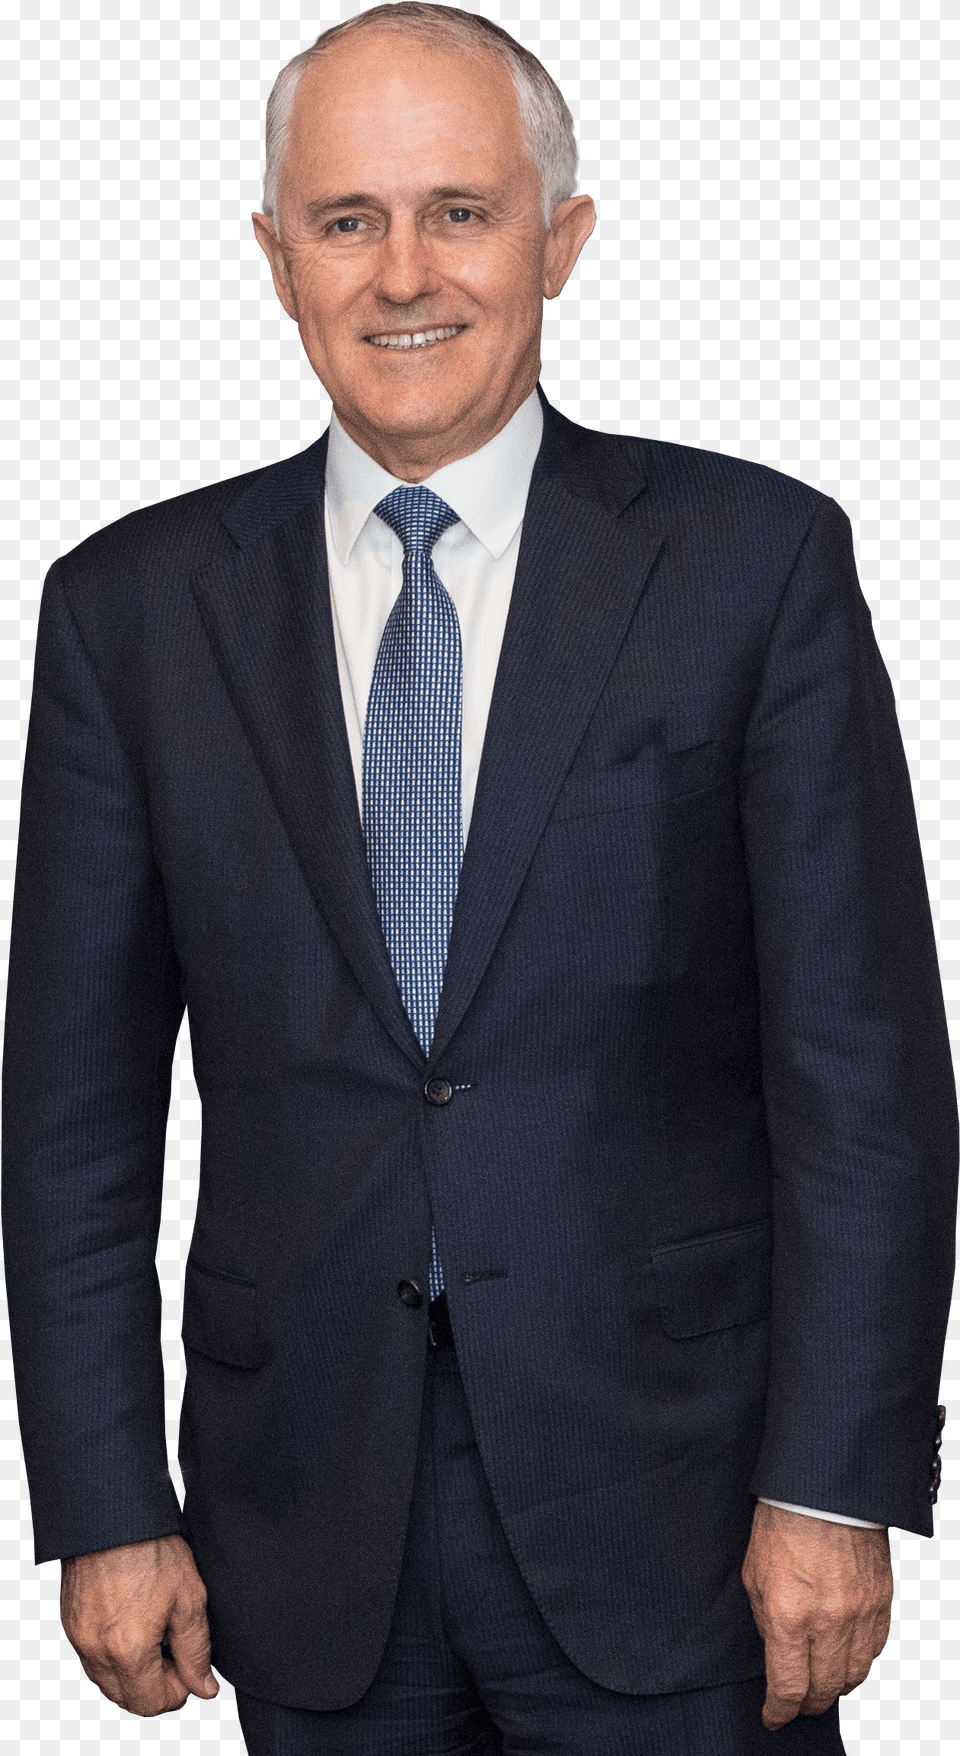 Malcolm Turnbull Background Malcolm Turnbull, Accessories, Suit, Jacket, Tie Png Image